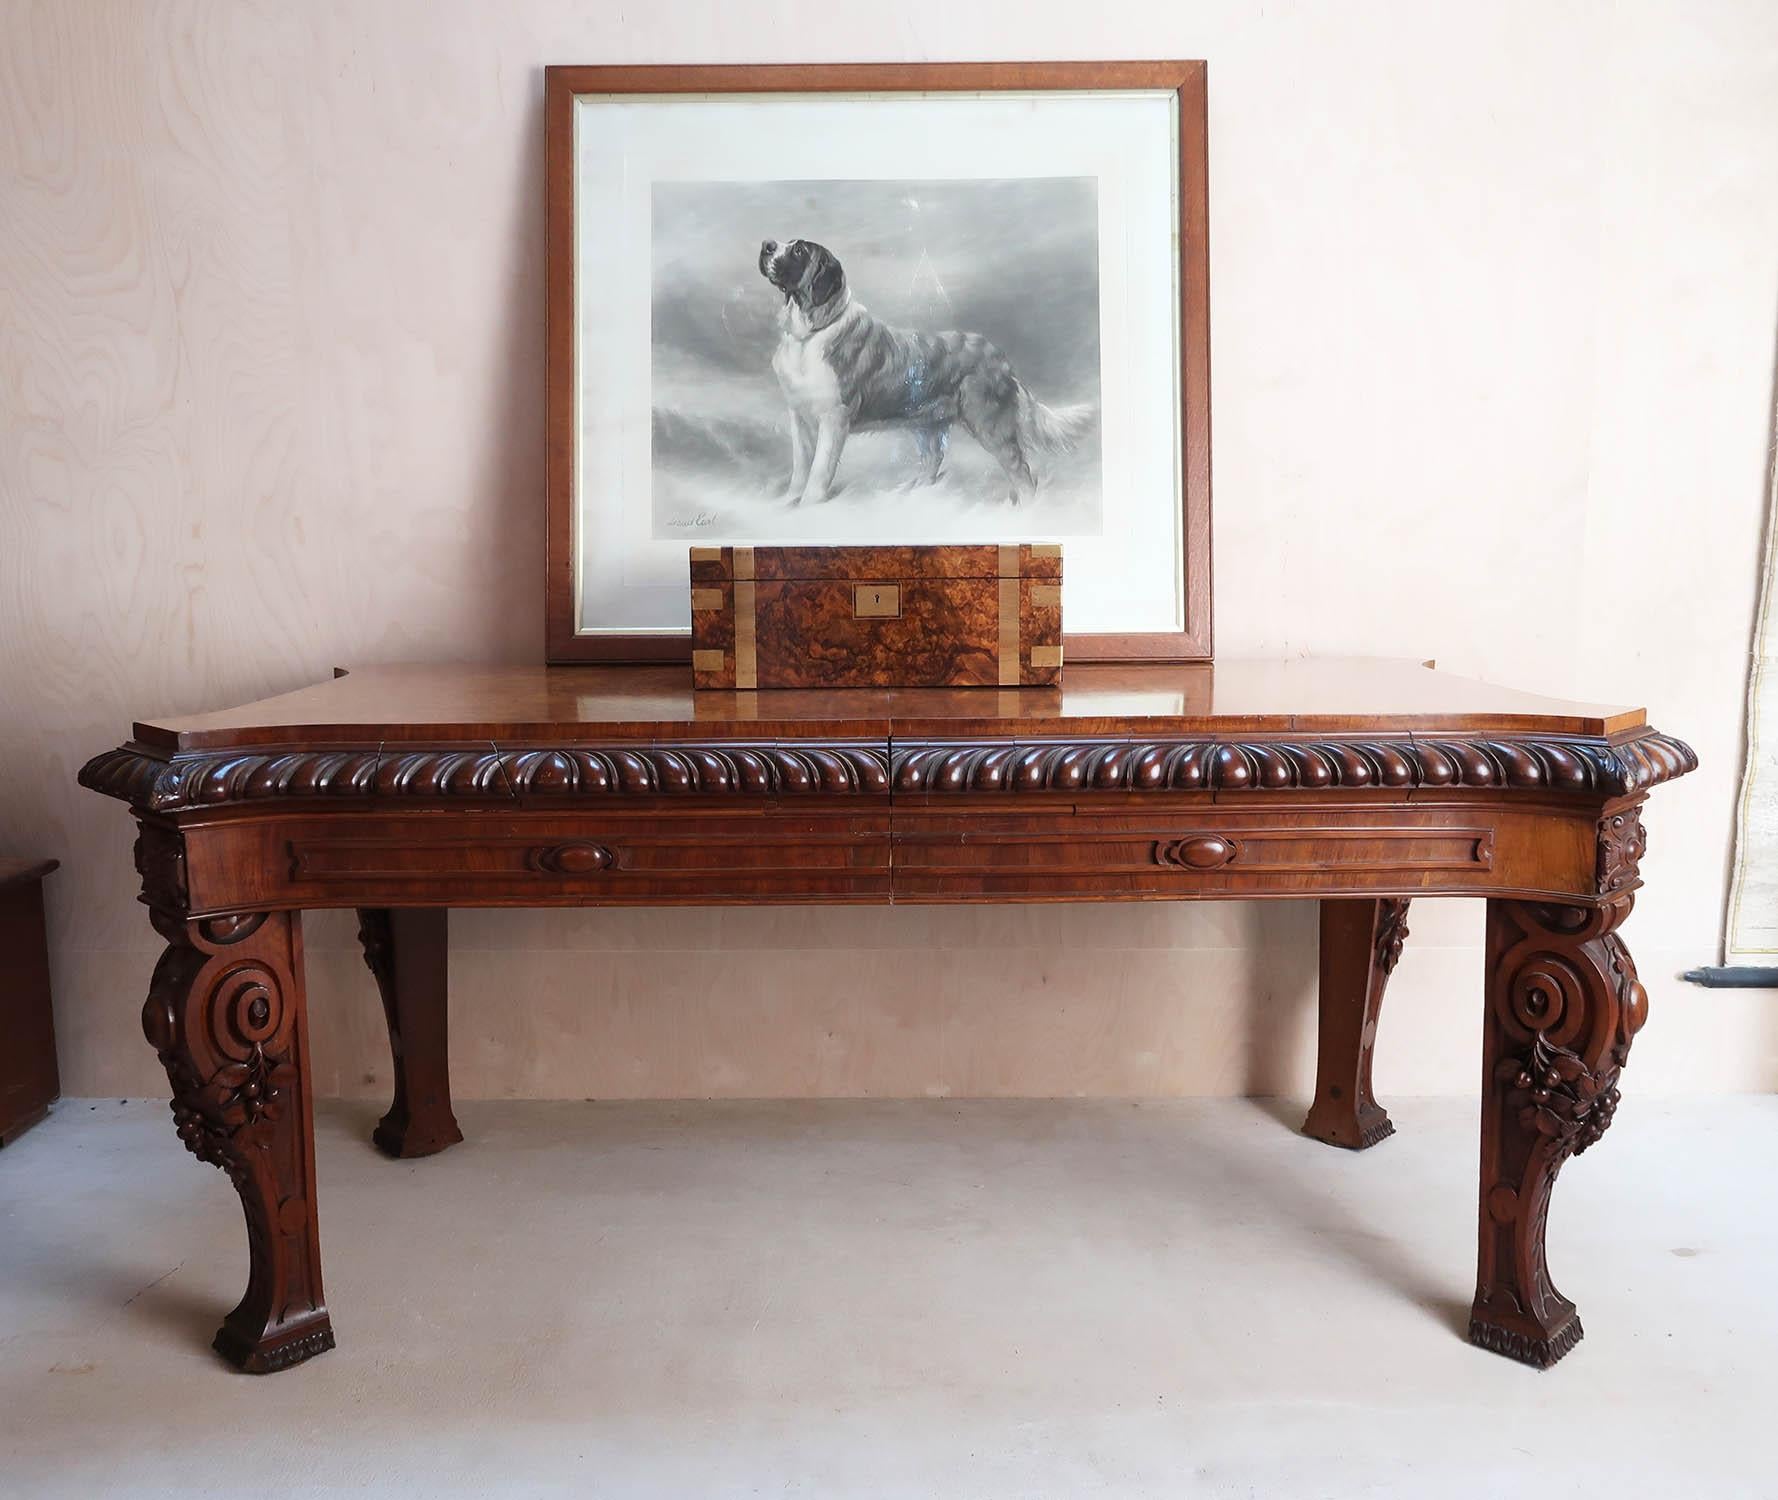 Wonderful pollard or burr oak table

Beautiful veneered top and solid pollard oak carved legs

Possibly Scottish. I have seen similar bold gadrooning on another Scottish table

It is freestanding so it can be used as a centre or library table.